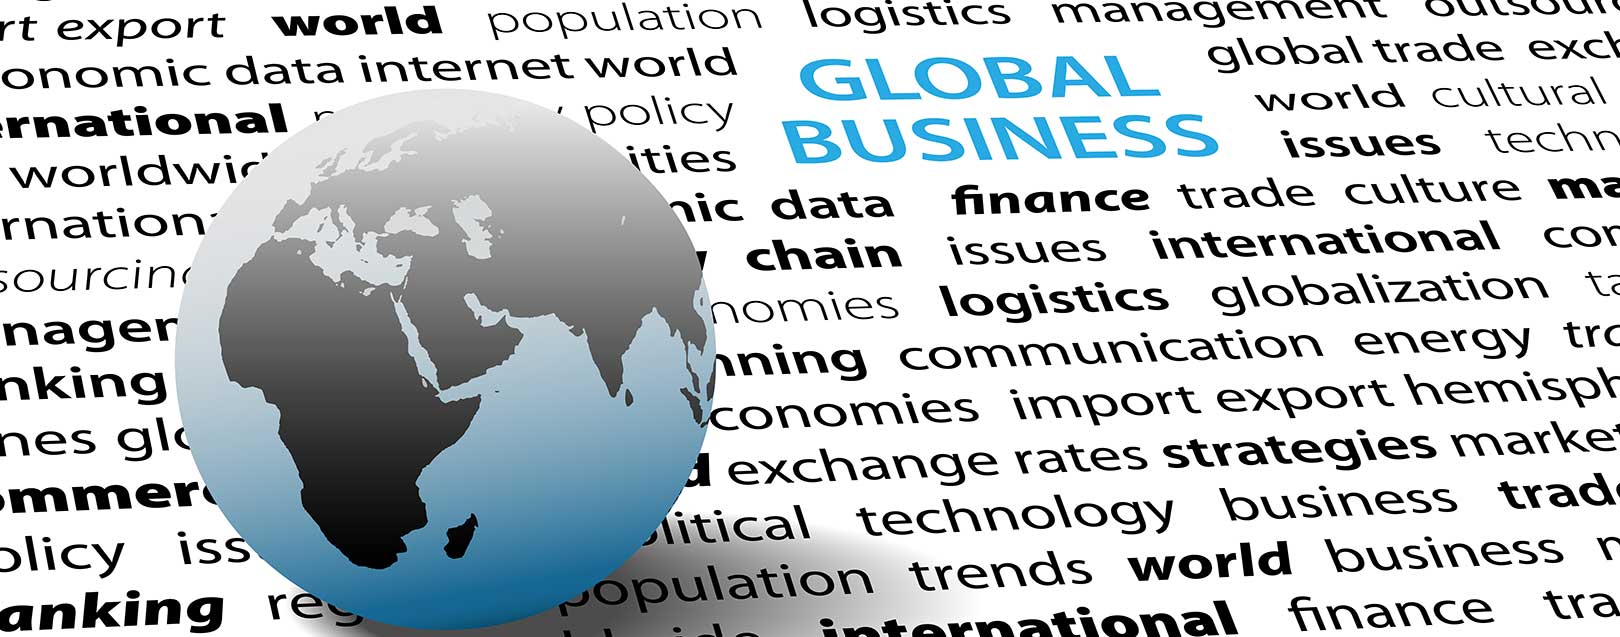 Trade policies focus on growth of exports – is it biased?